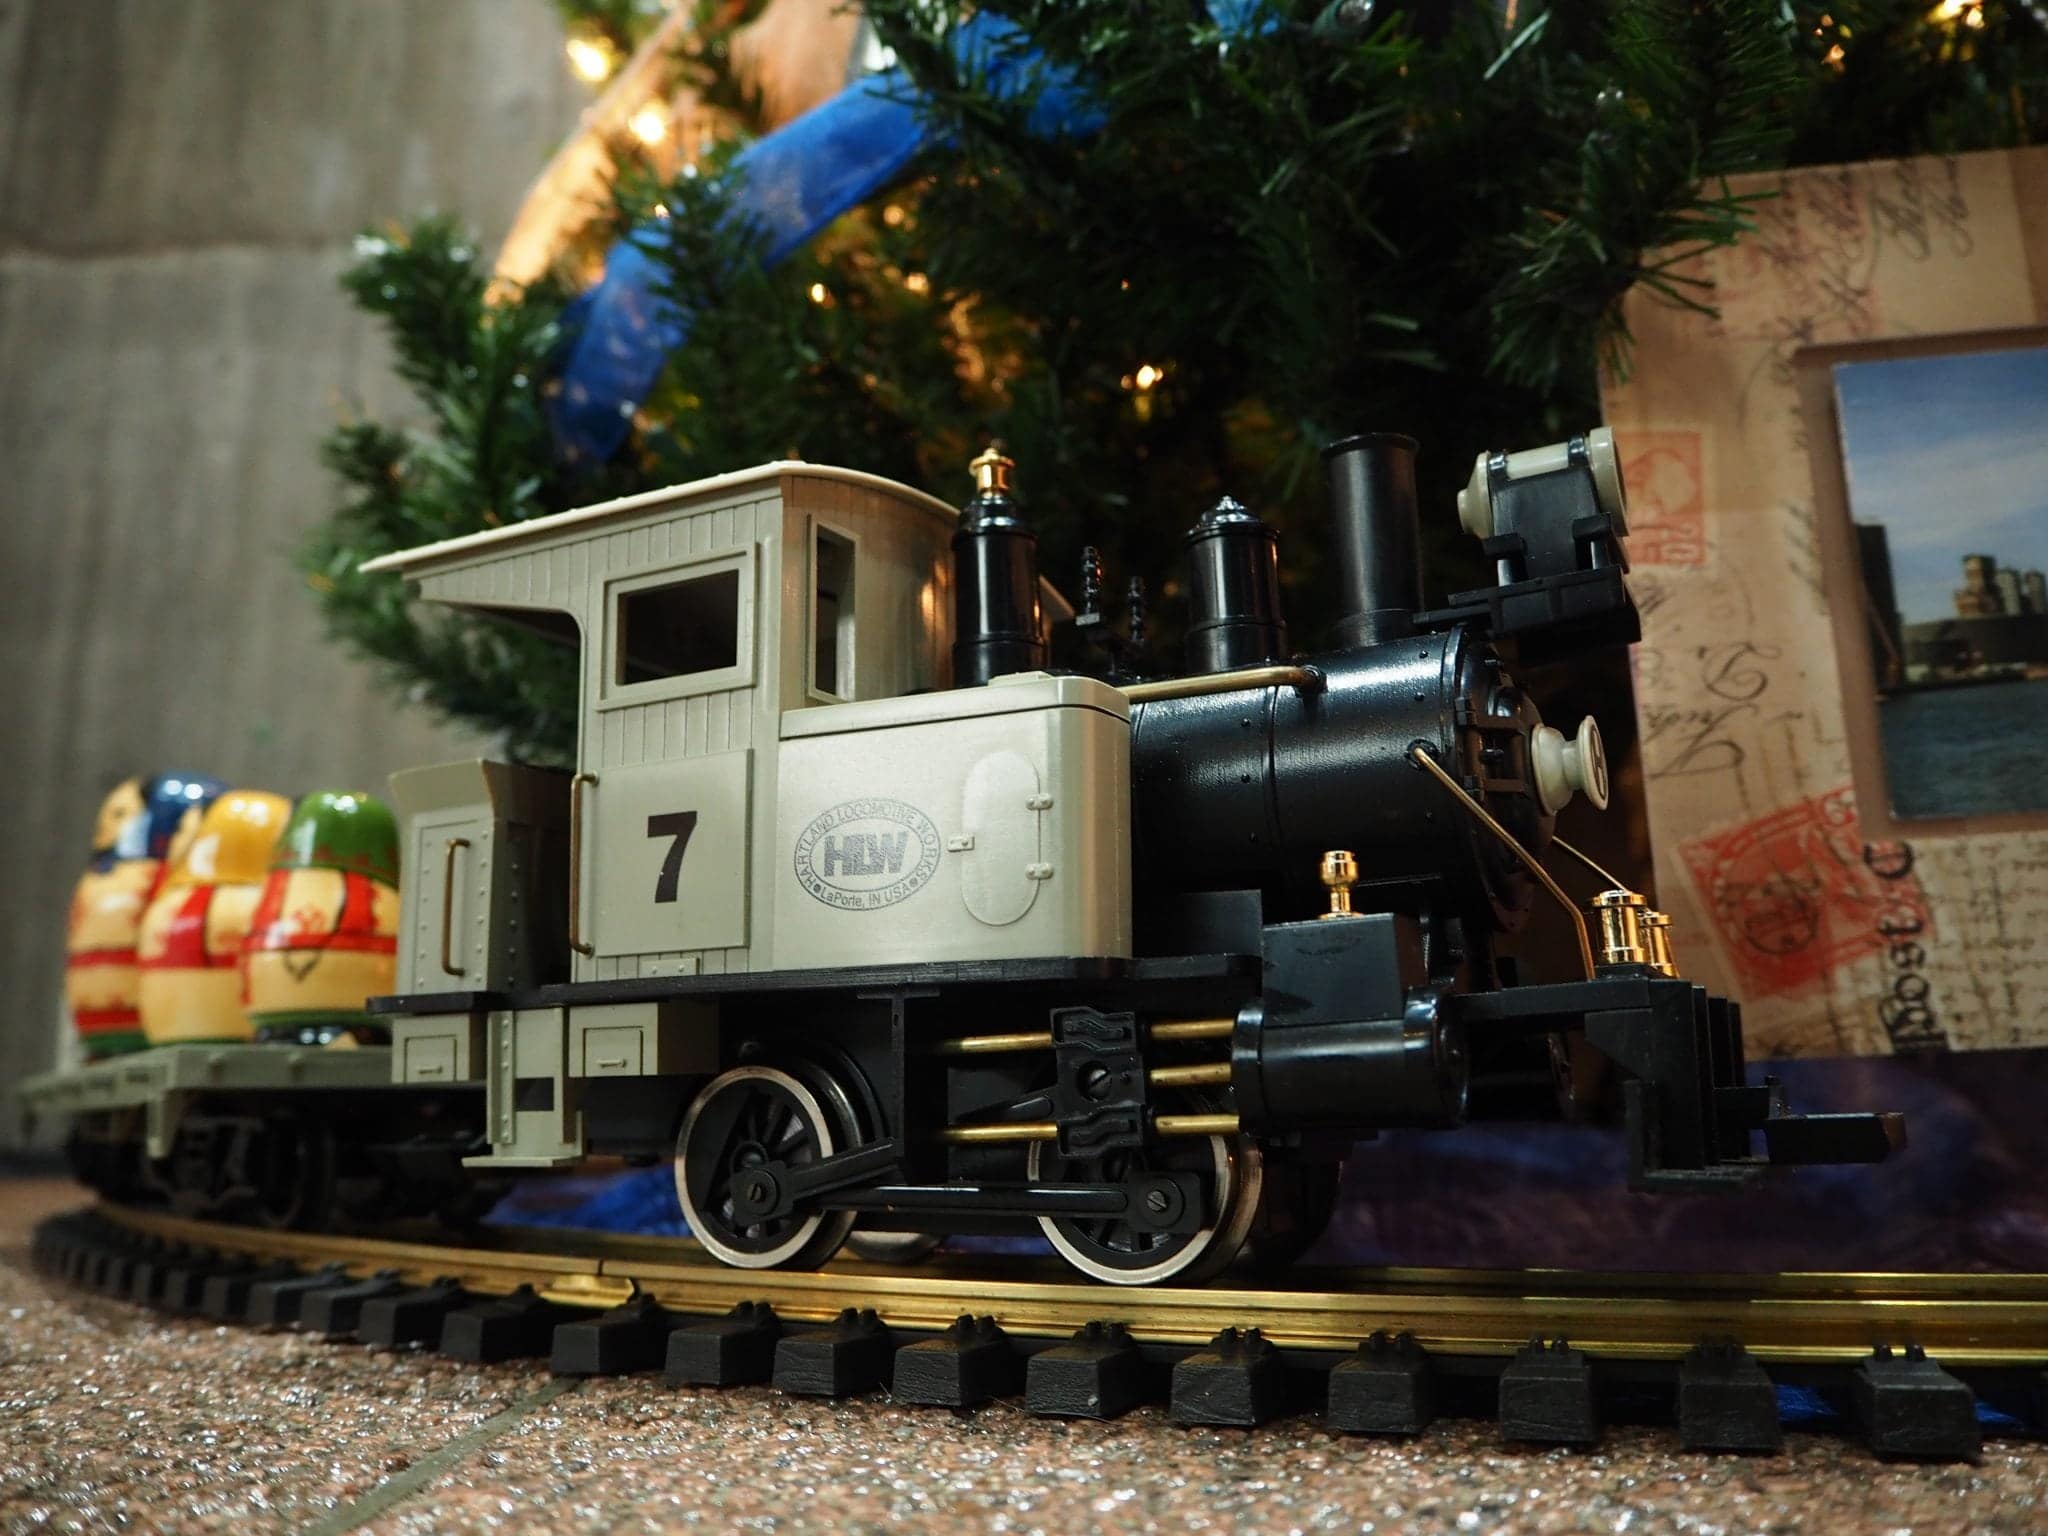 Train set at Festival of Trees